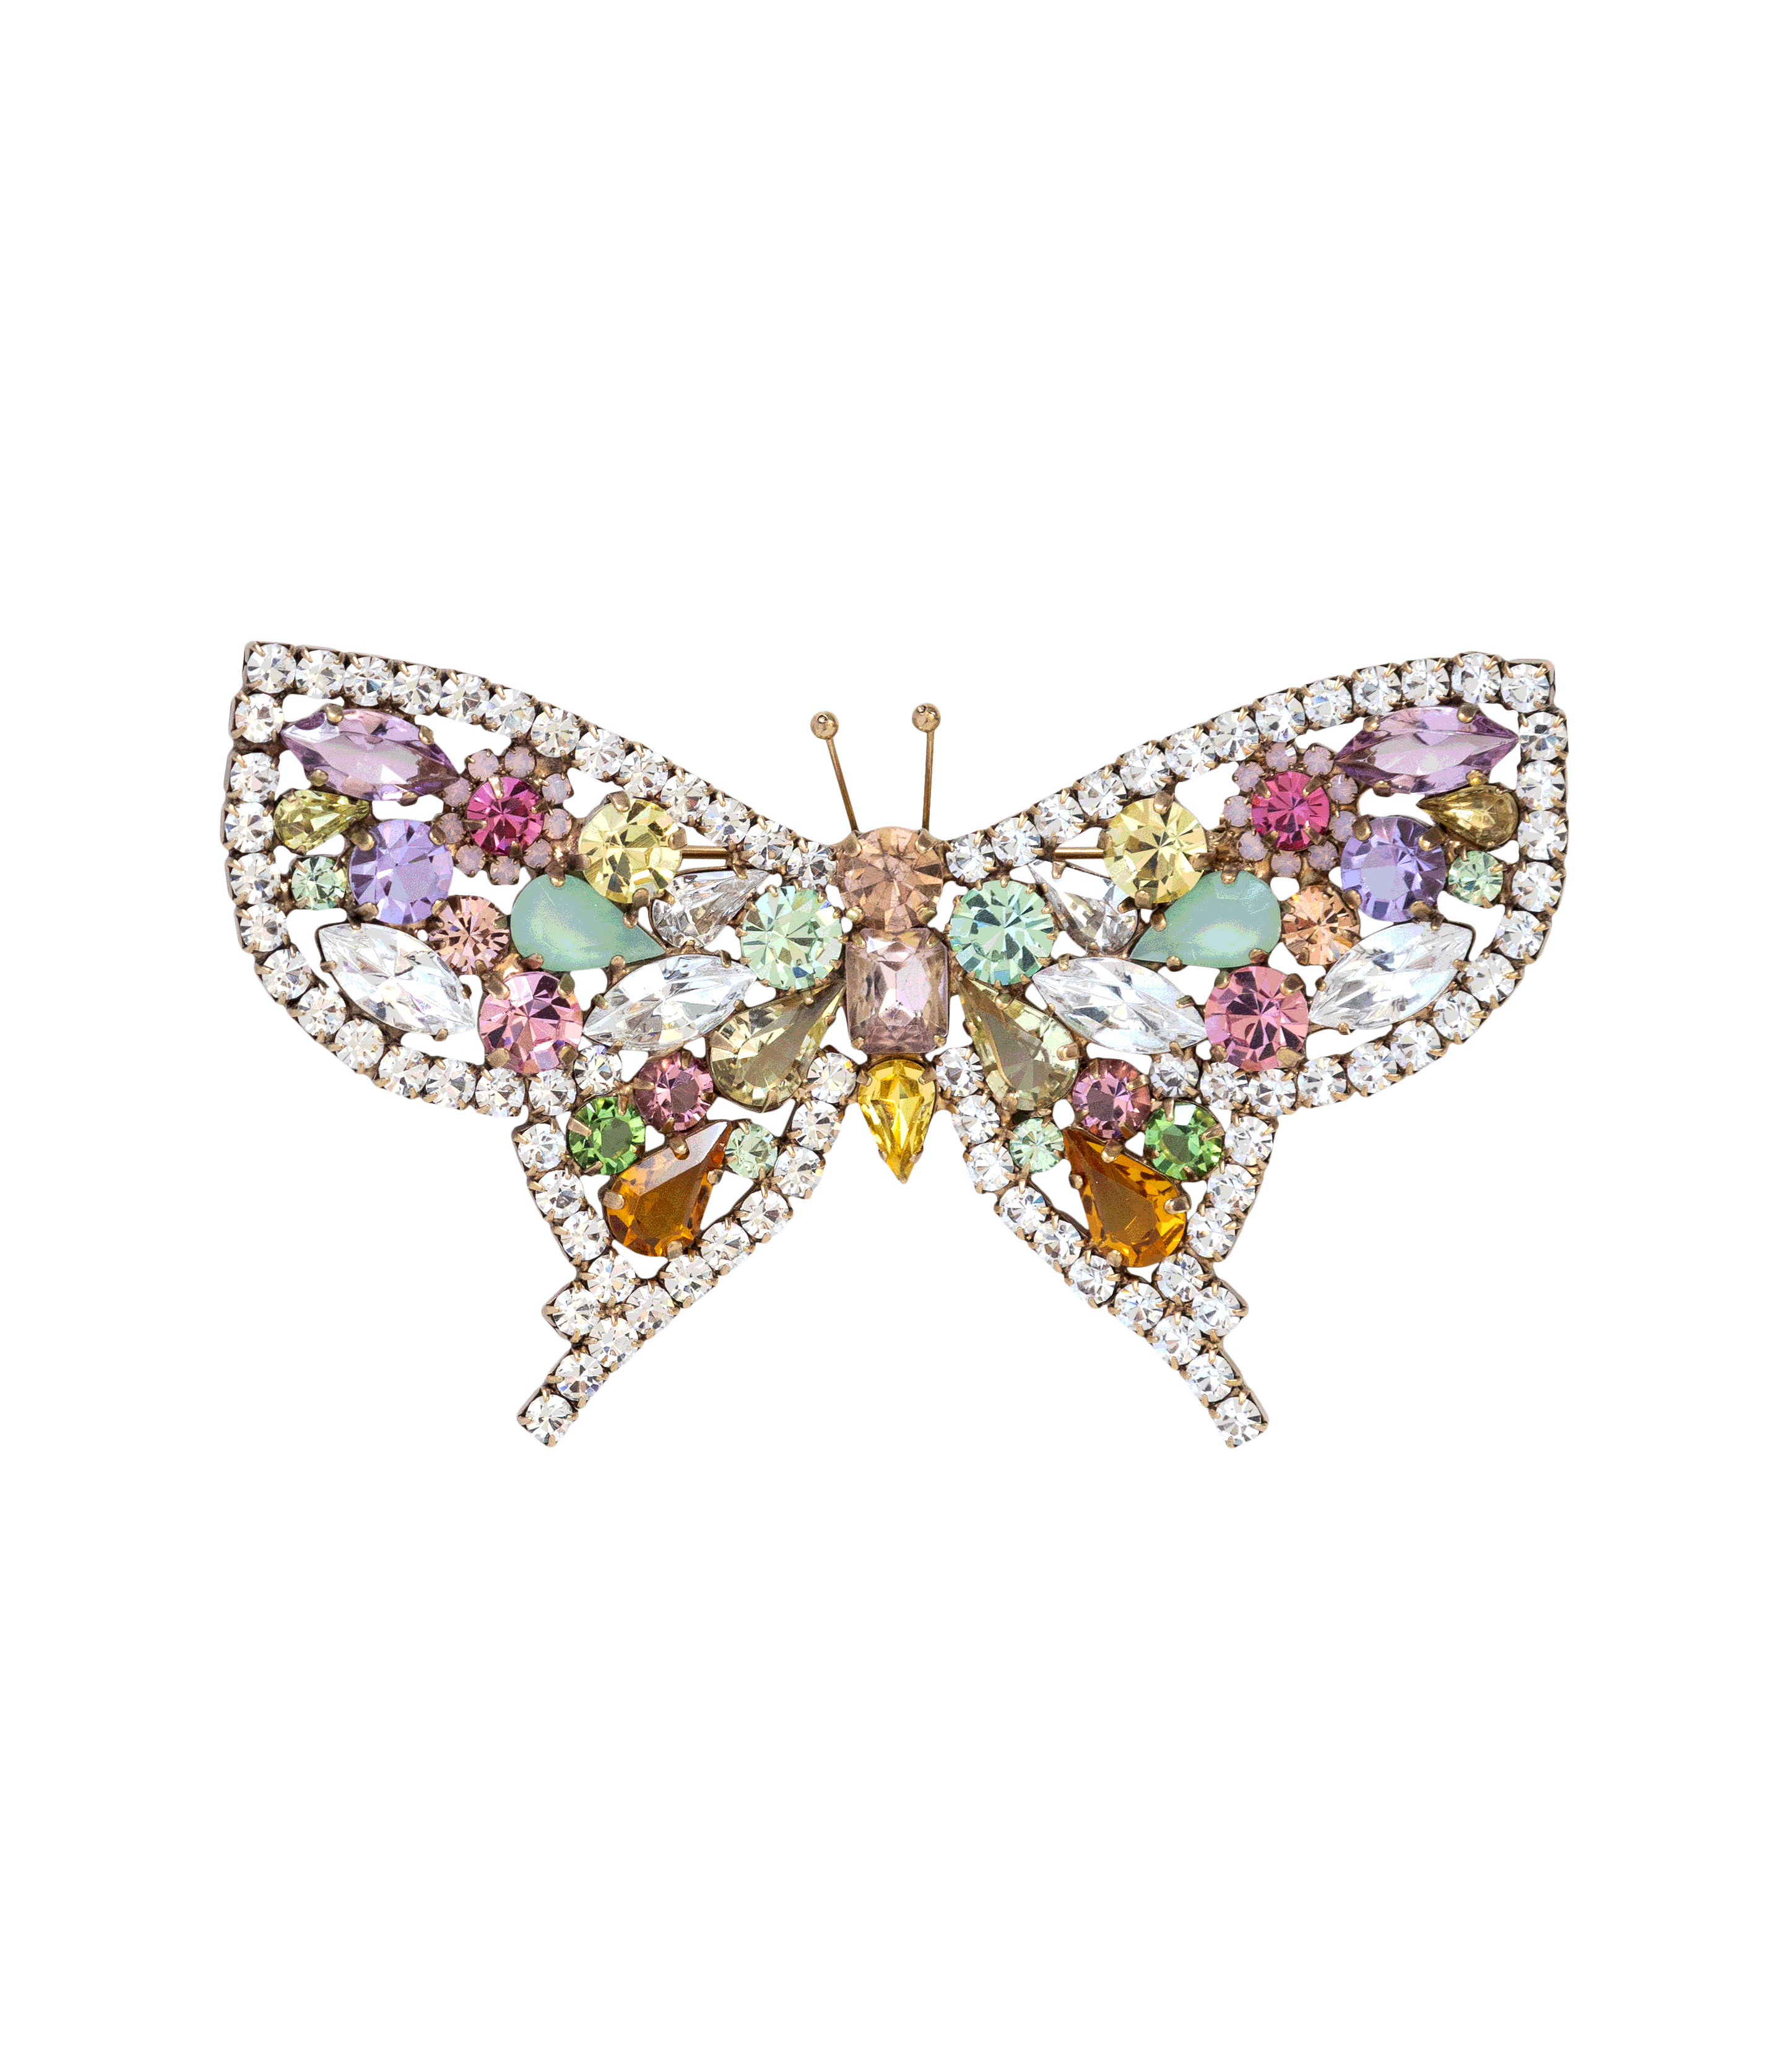 Large Butterfly in Crystal / Multi